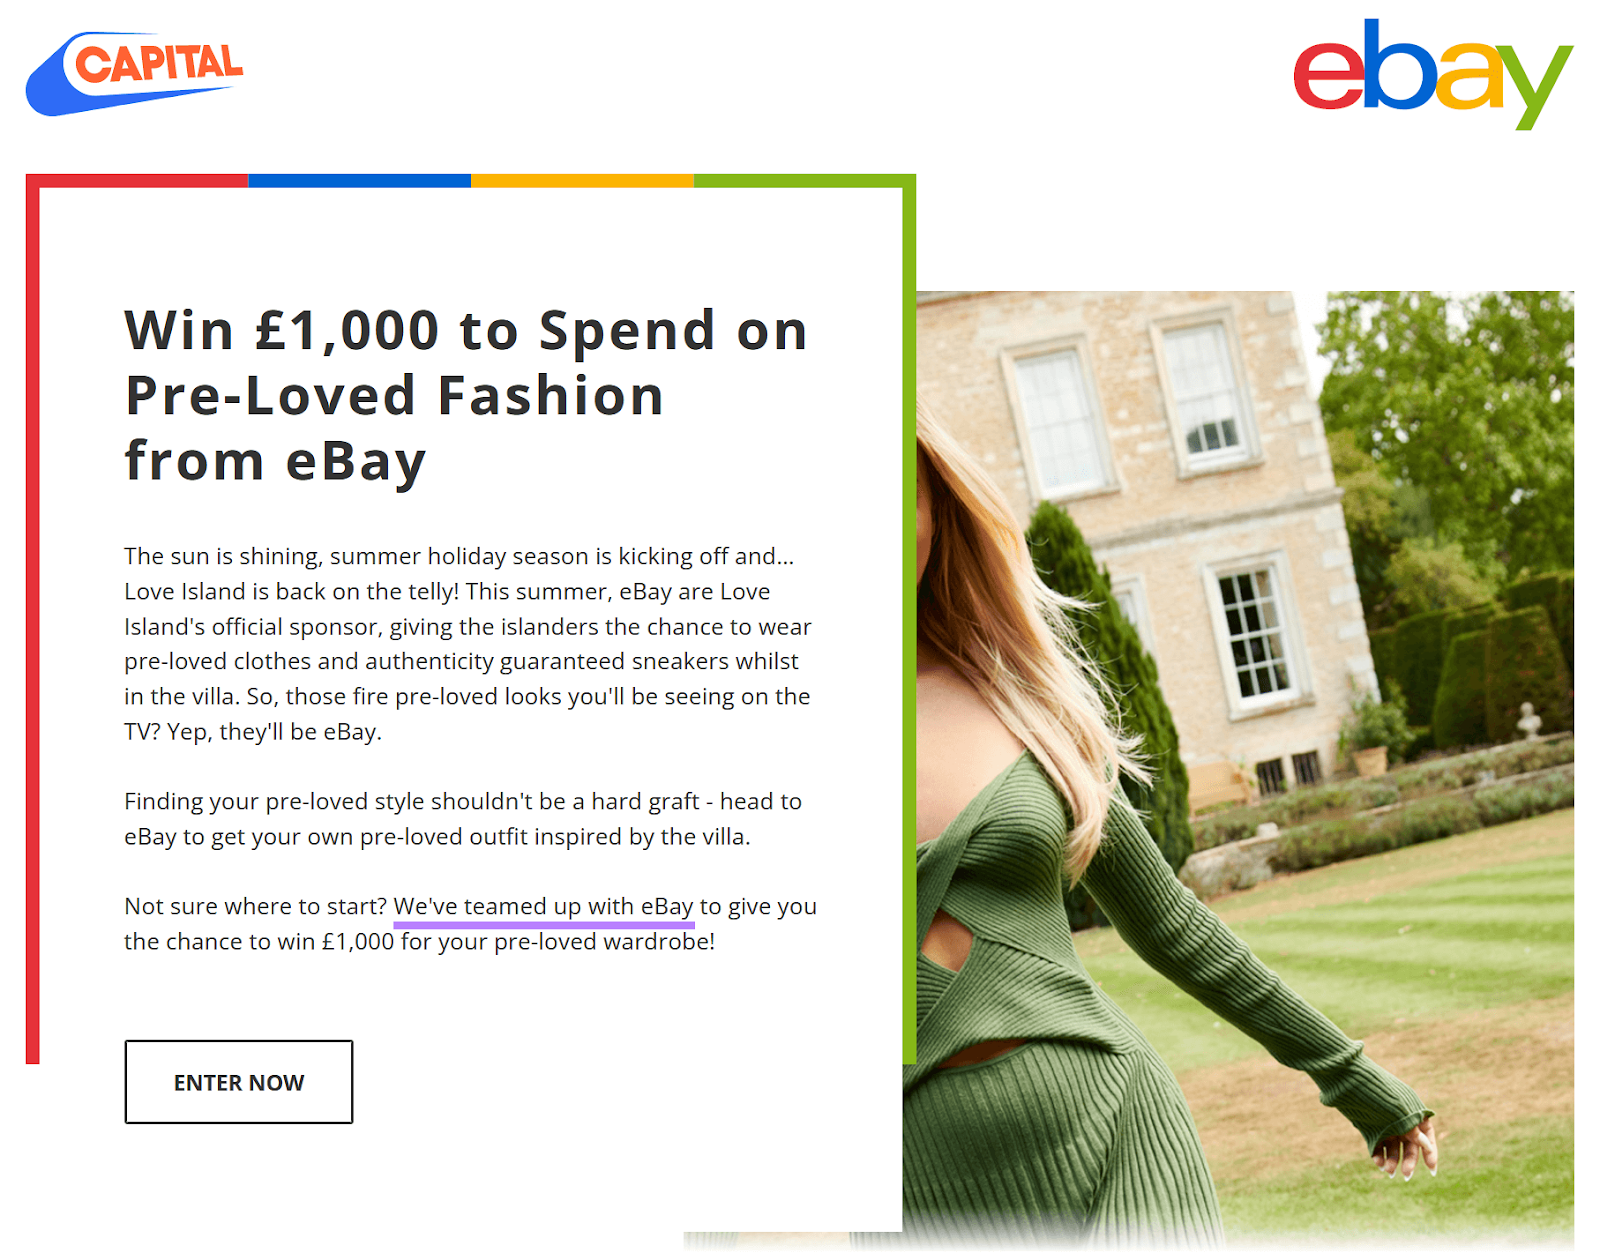 Capital FM ،sted a compe،ion for Ebay: